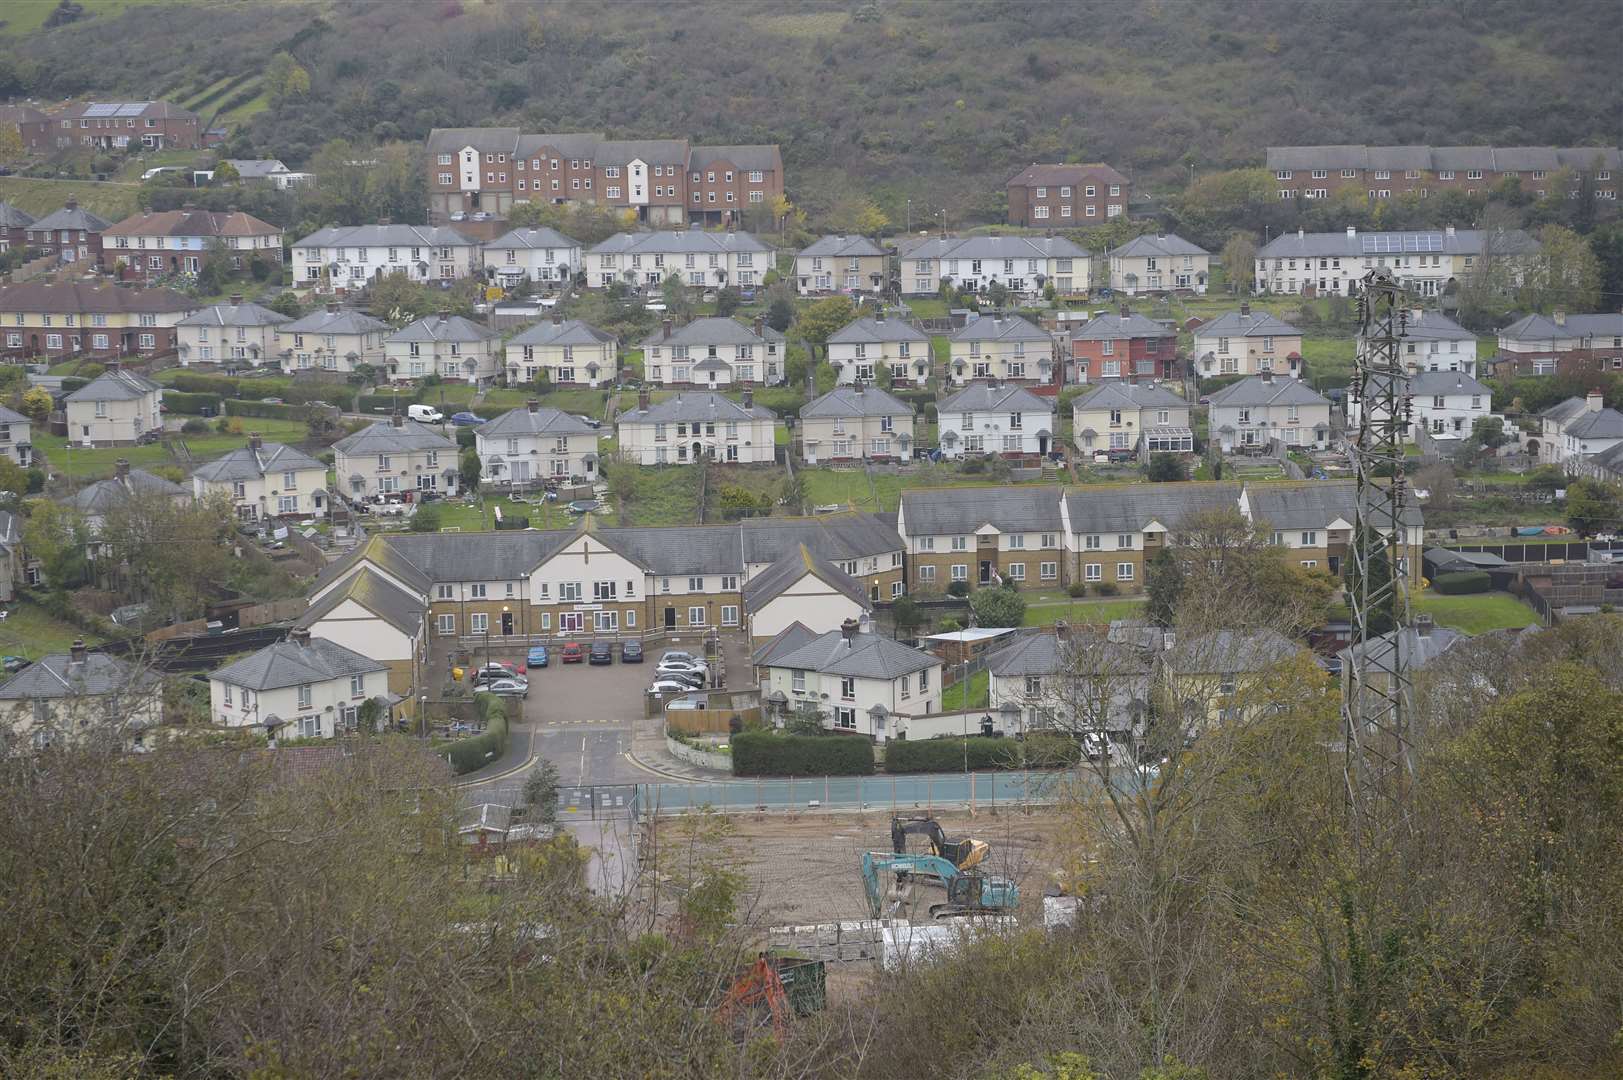 St Radigund's is one of the country's most deprived areas, says the report Picture: Tony Flashman